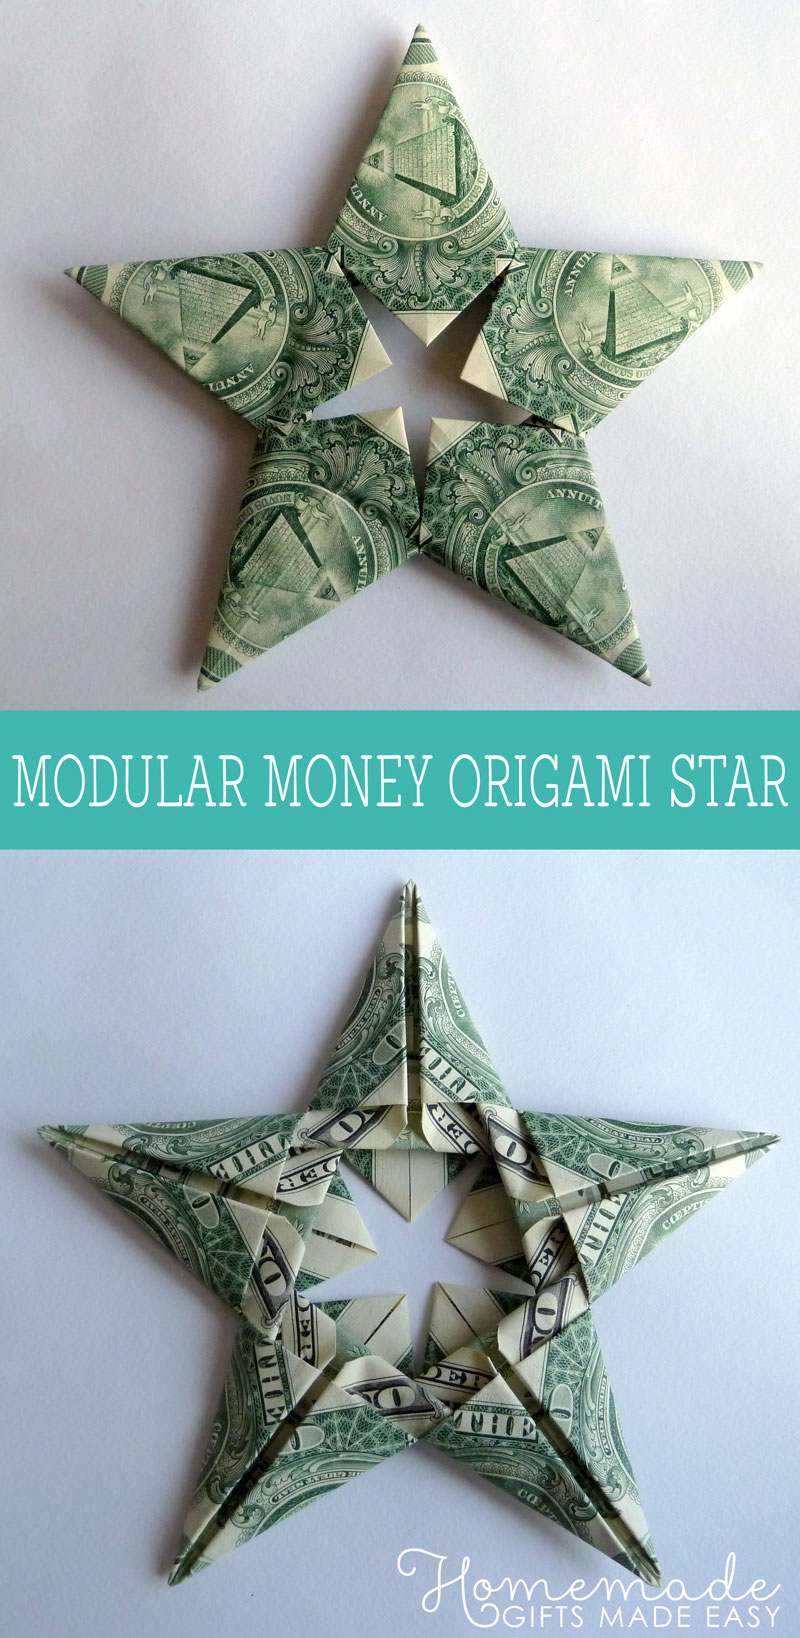 How To Make An Origami Star Modular Money Origami Star From 5 Bills How To Fold Step Step